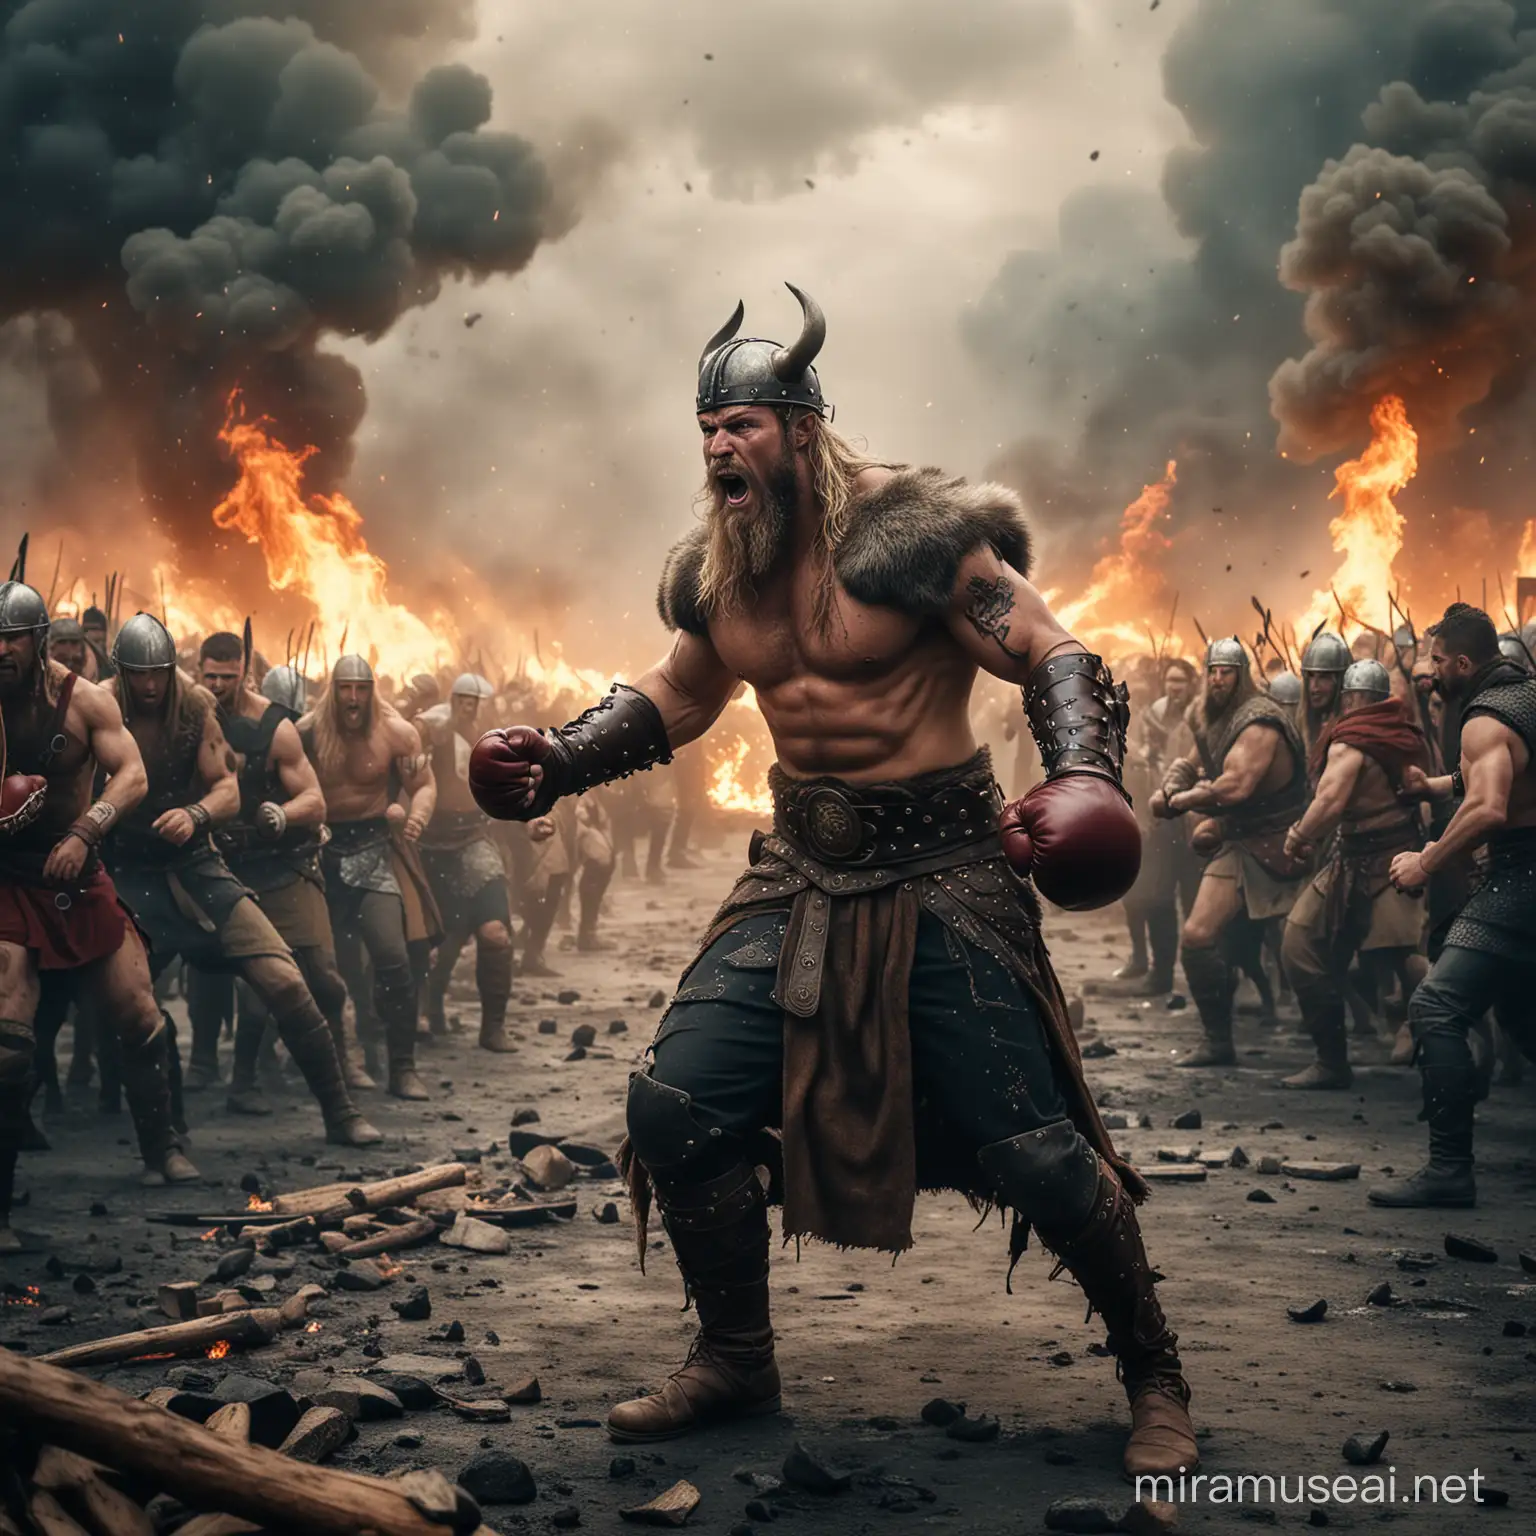 Epic Viking Warrior Battling with Boxing Gloves Amidst Fiery Chaos